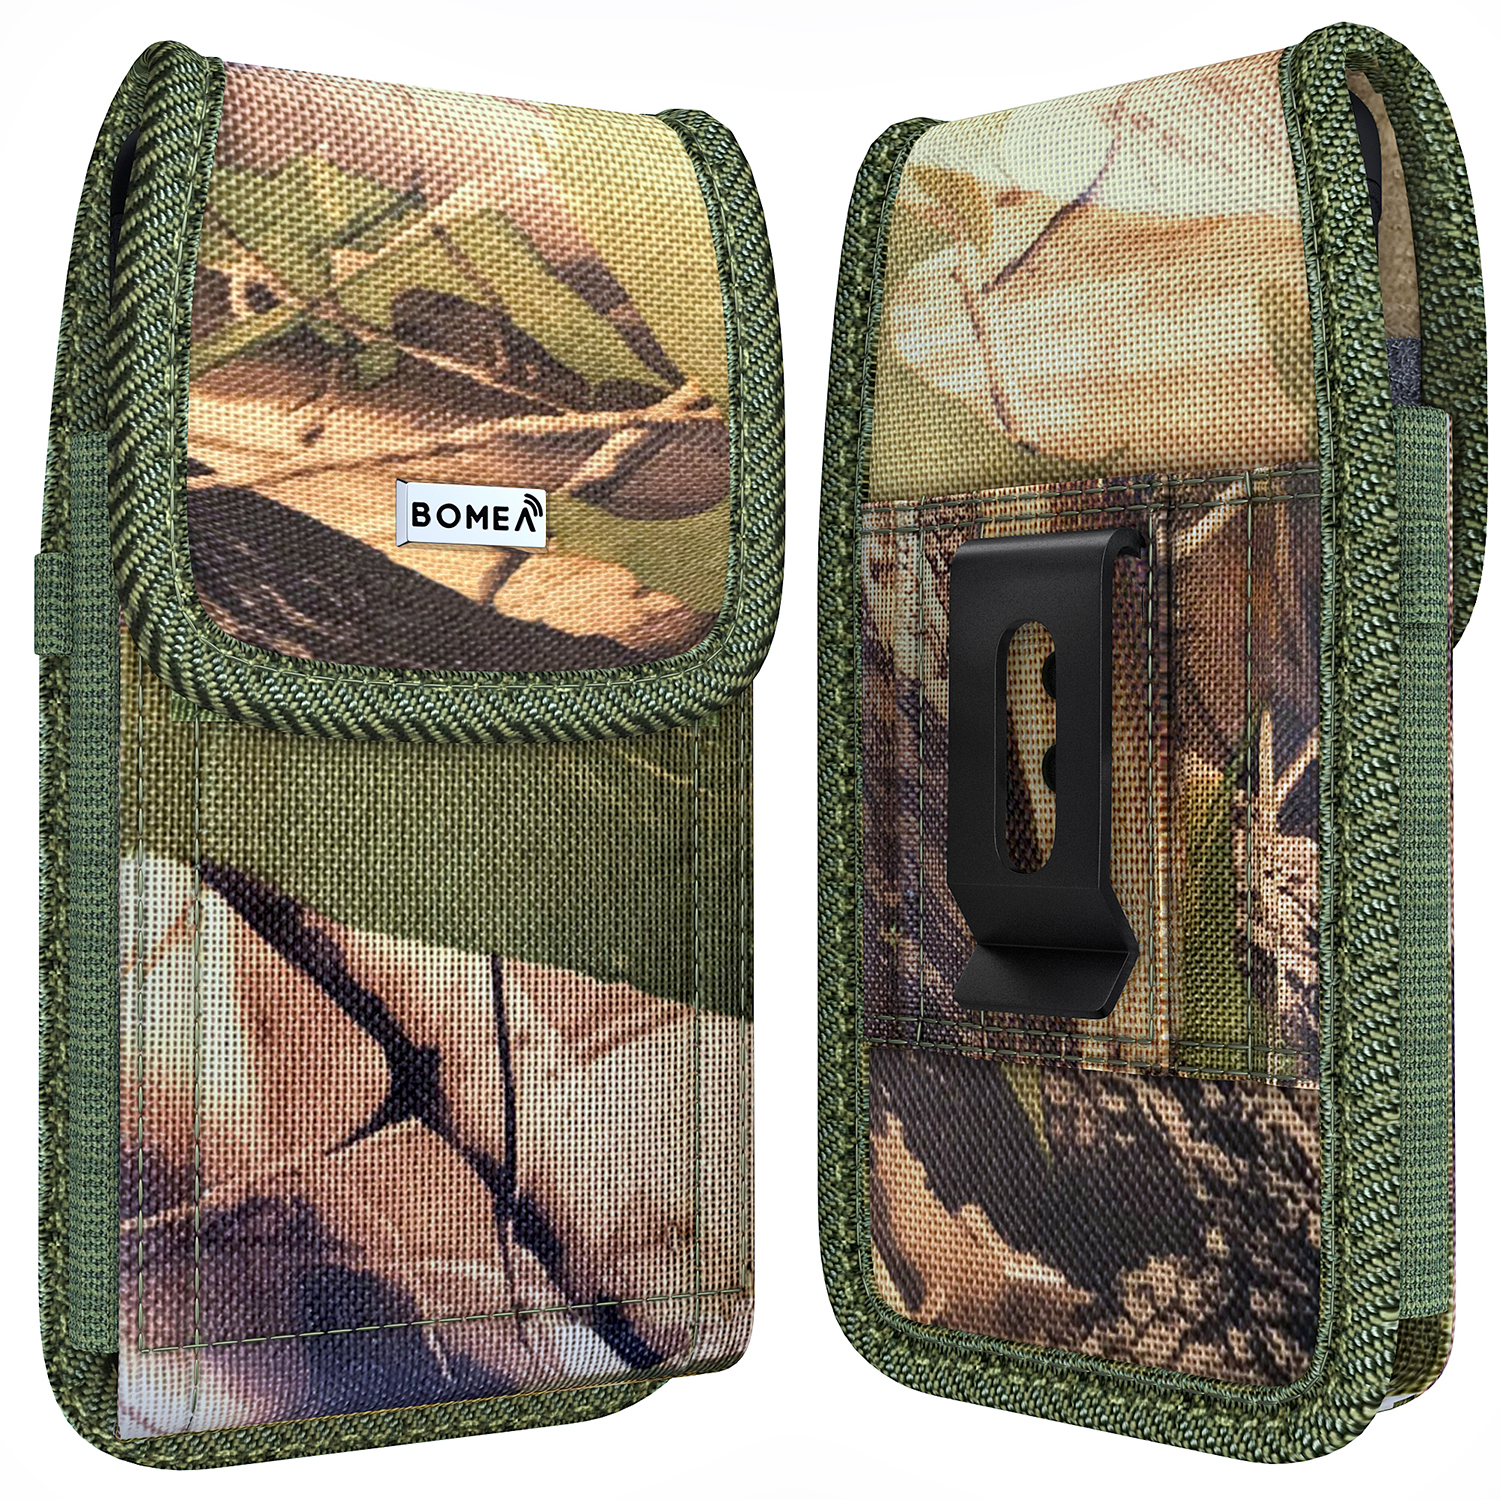 iPhone 11 Pro Max/Xs Max Holster Case - Rugged Nylon Belt Clip Case Cell Phone Carrying Pouch Holder Belt Holster for Apple iPhone 11 Pro Max/Xs Max (Fits Phone w/Otterbox Case on) Camo - image 1 of 6